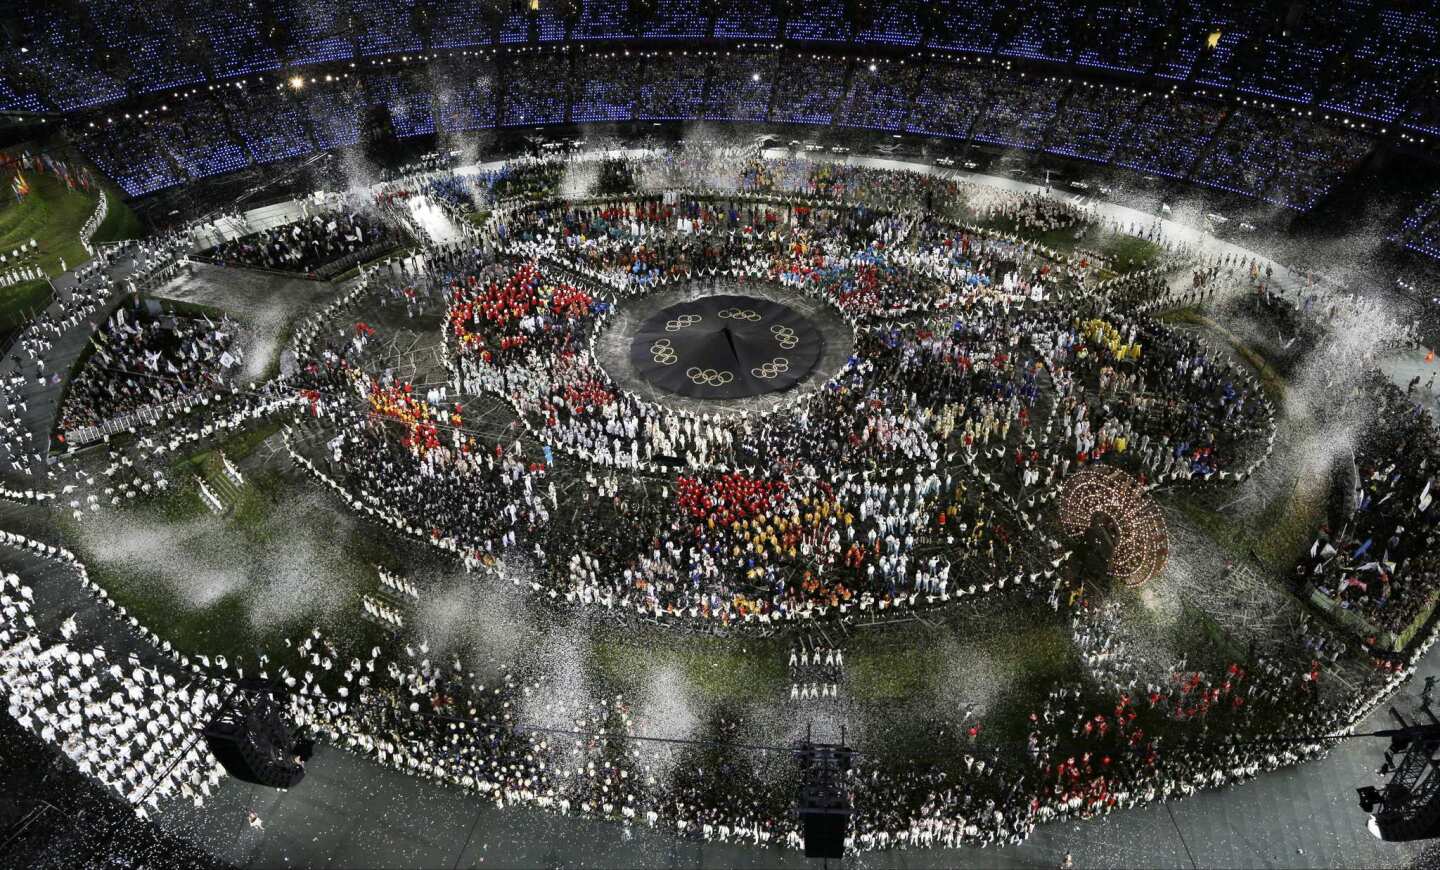 Athletes march in a parade during the Opening Ceremony at the 2012 Summer Olympics in London.